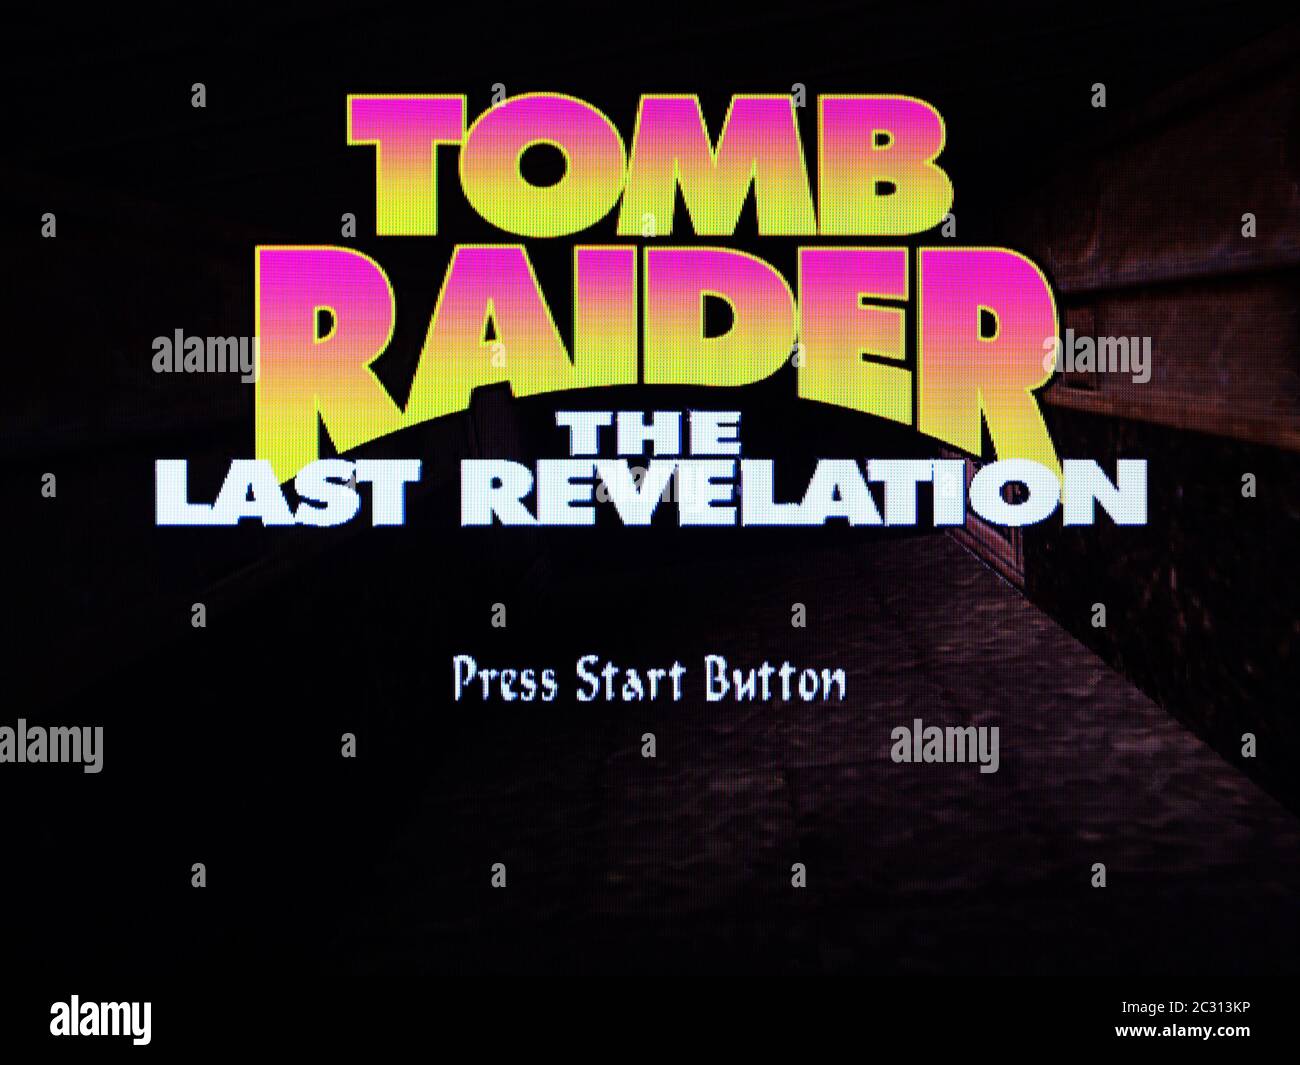 Tomb Raider The Last Revelation - Sega Dreamcast Videogame - Editorial use only Stock Photo